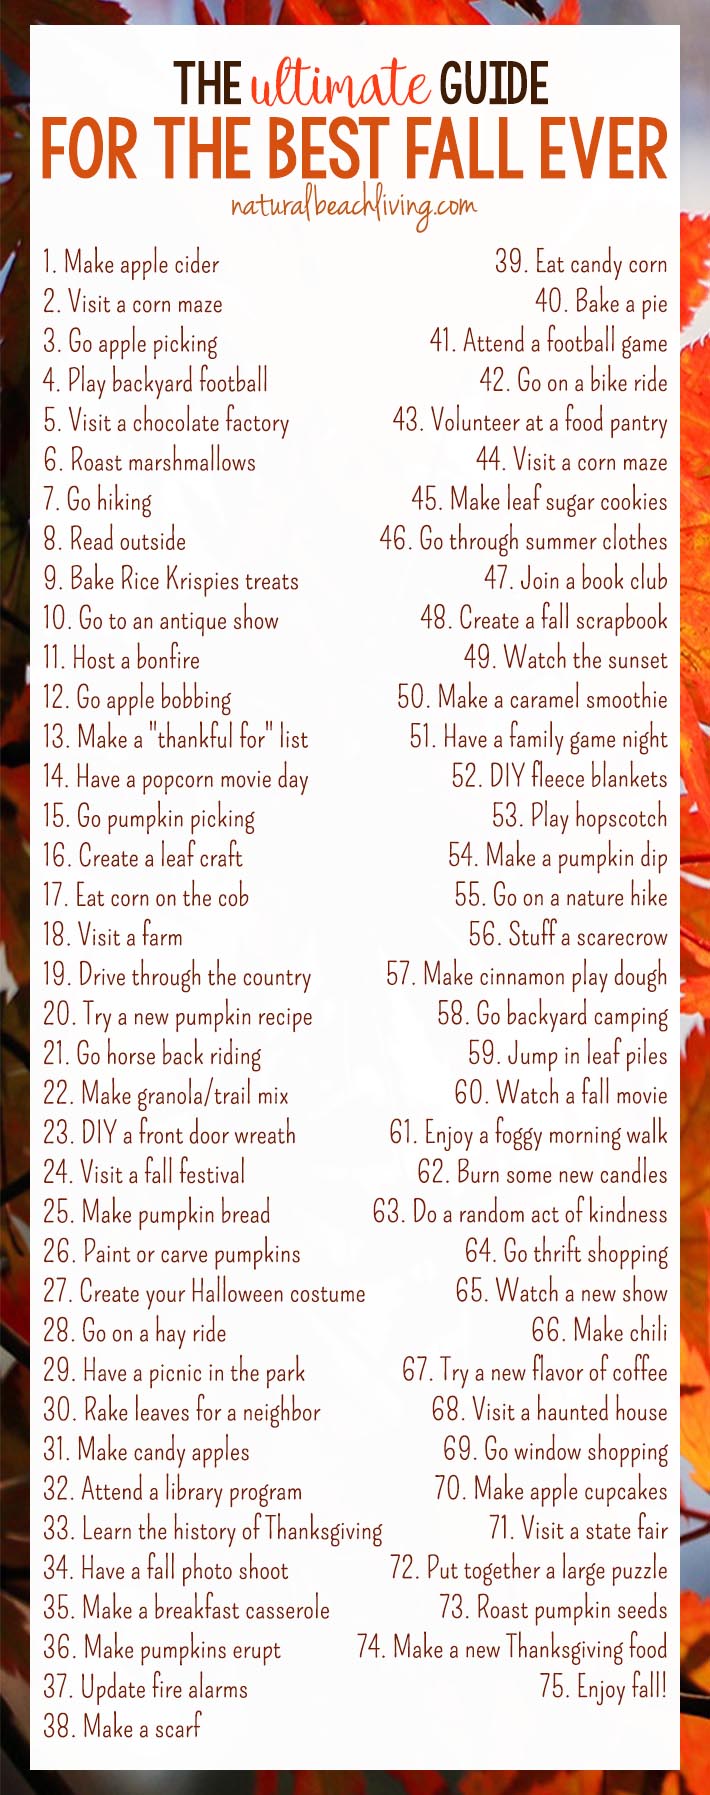 200+ Fall Bucket List Ideas, Fall Themes, Fall Activities and Crafts for Kids and Families, 13 different Fall Bucket List Printables and Fall Bucket Lists for Families, adults, and Kids. Full of wonderful things you want to do and experience this Autumn season. Autumn Bucket List 